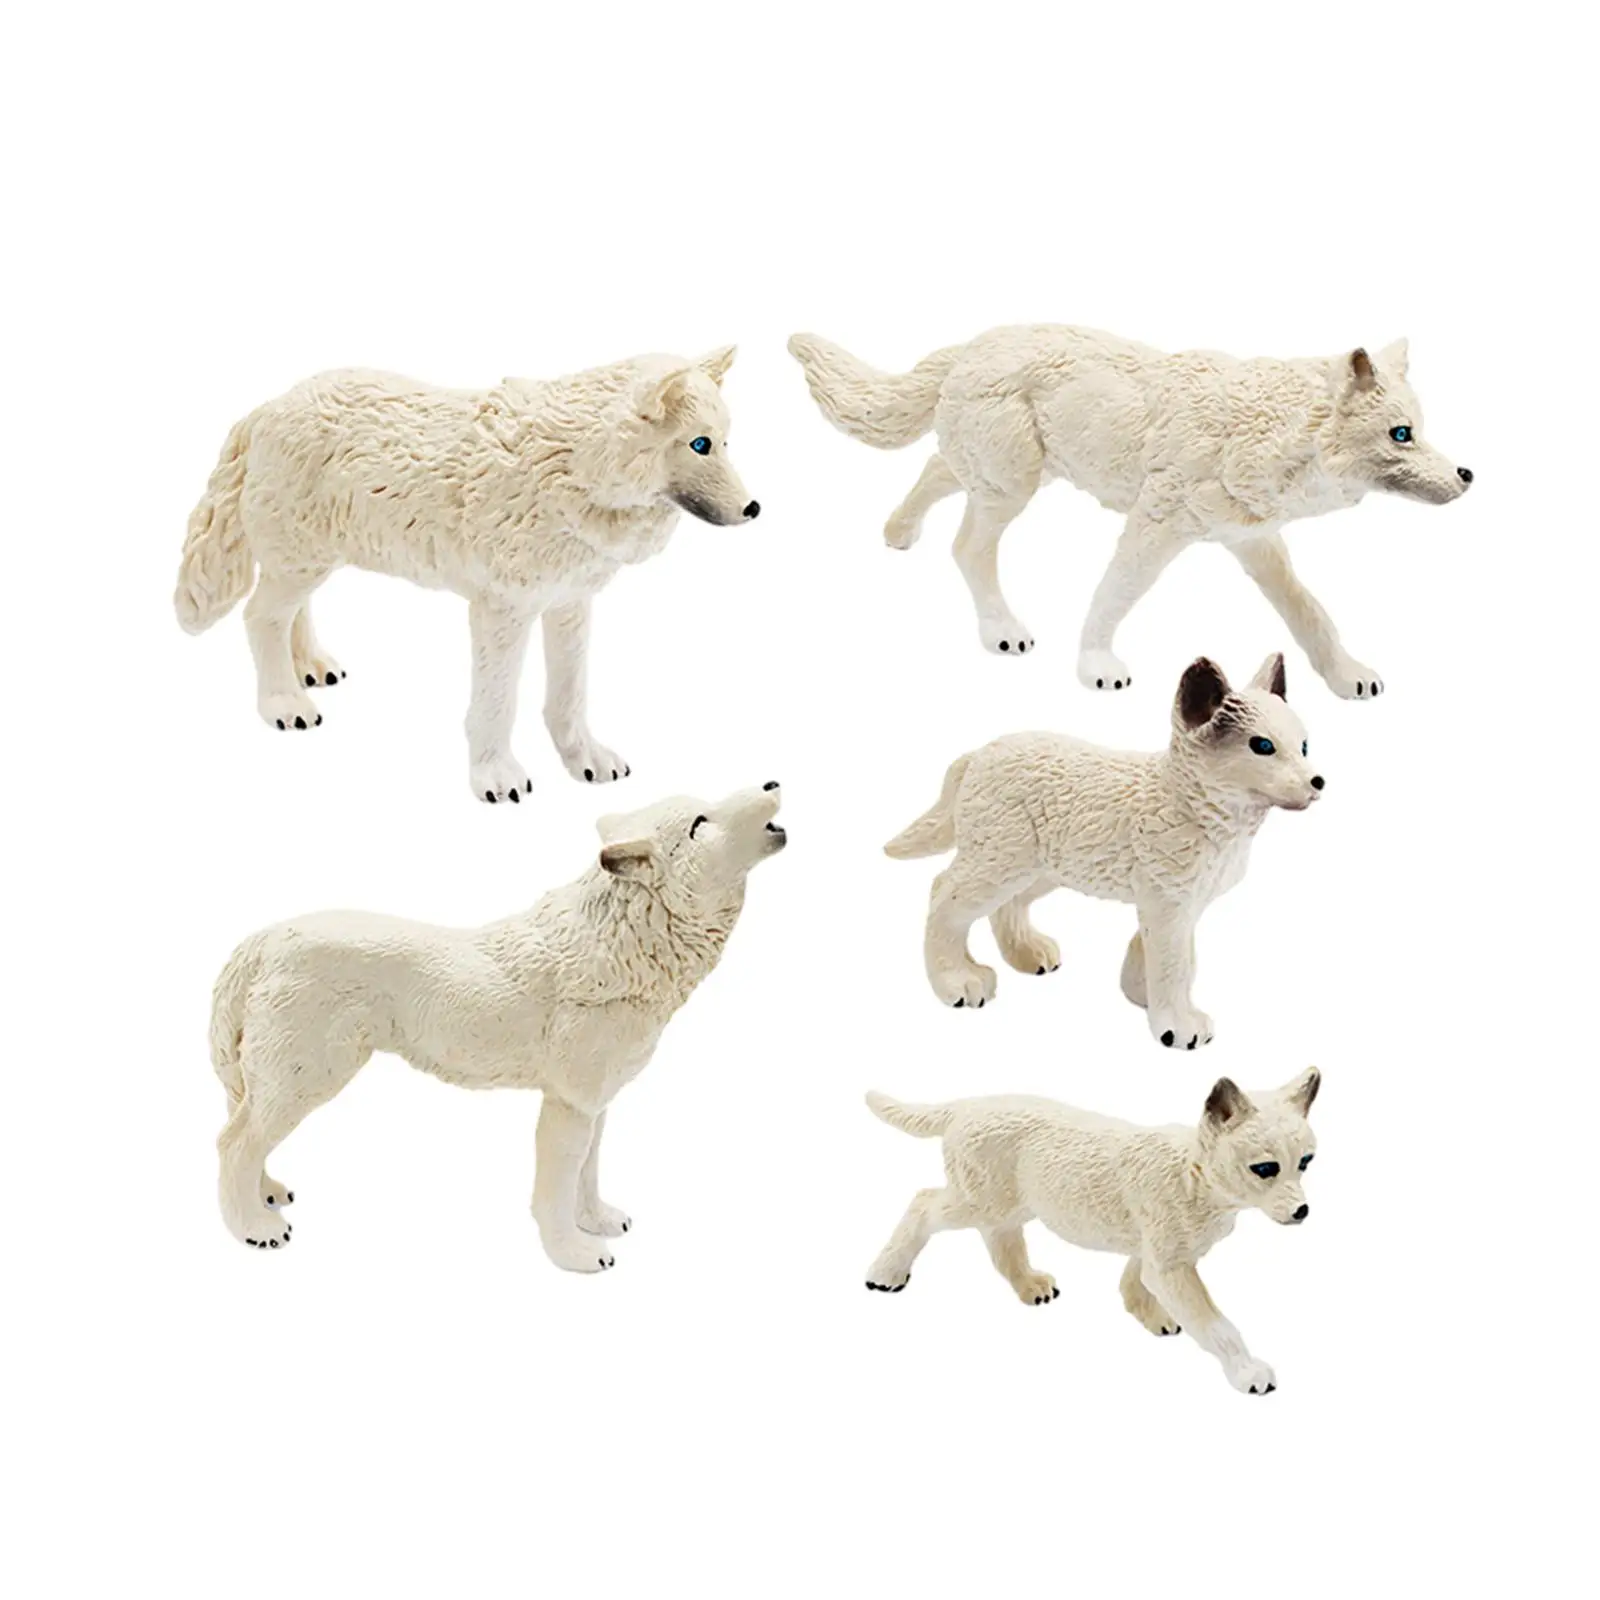 5 Pieces Wolf Figurines Wildlife Animal Statue for Educational Toys Xmas Present